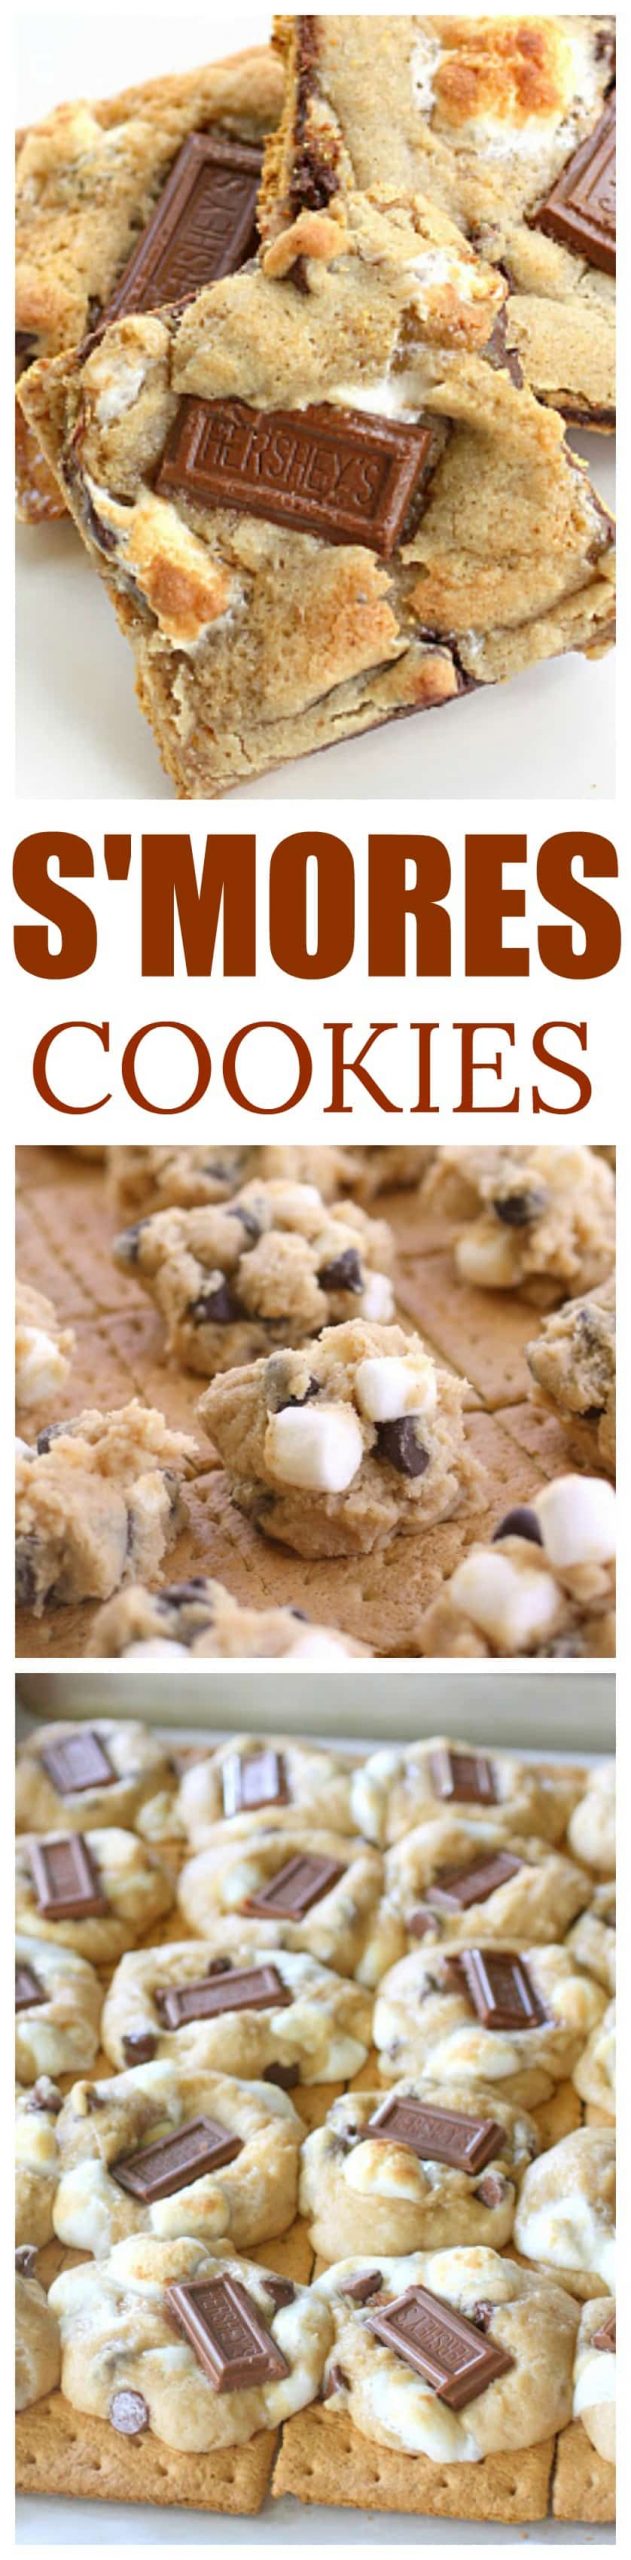 fb image scaled - S’mores Cookies